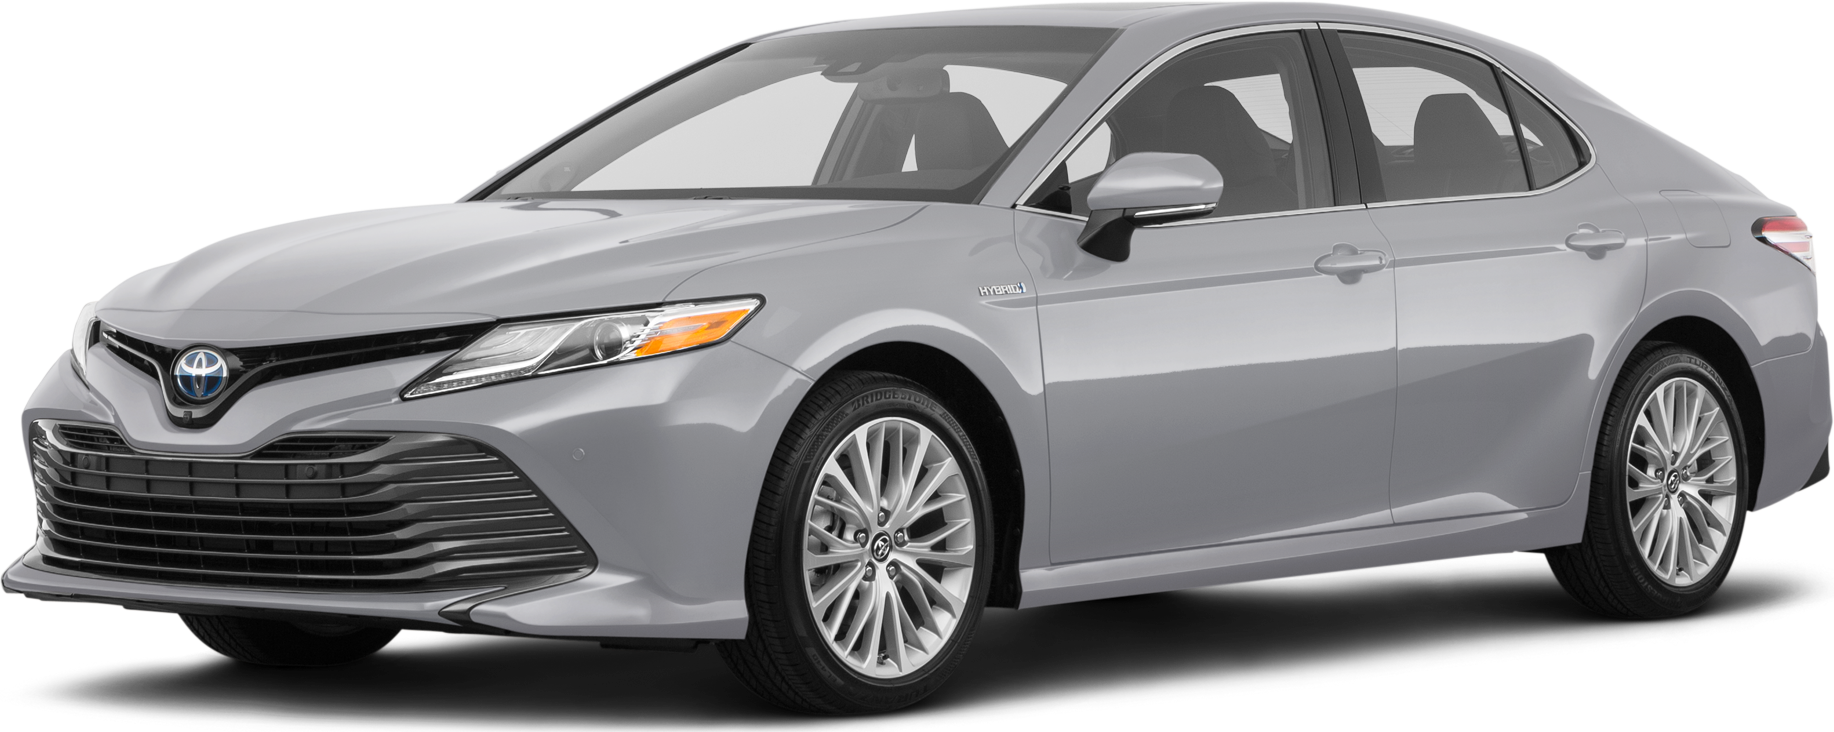 2020 Toyota Camry Hybrid Reviews, Pricing & Specs Kelley Blue Book